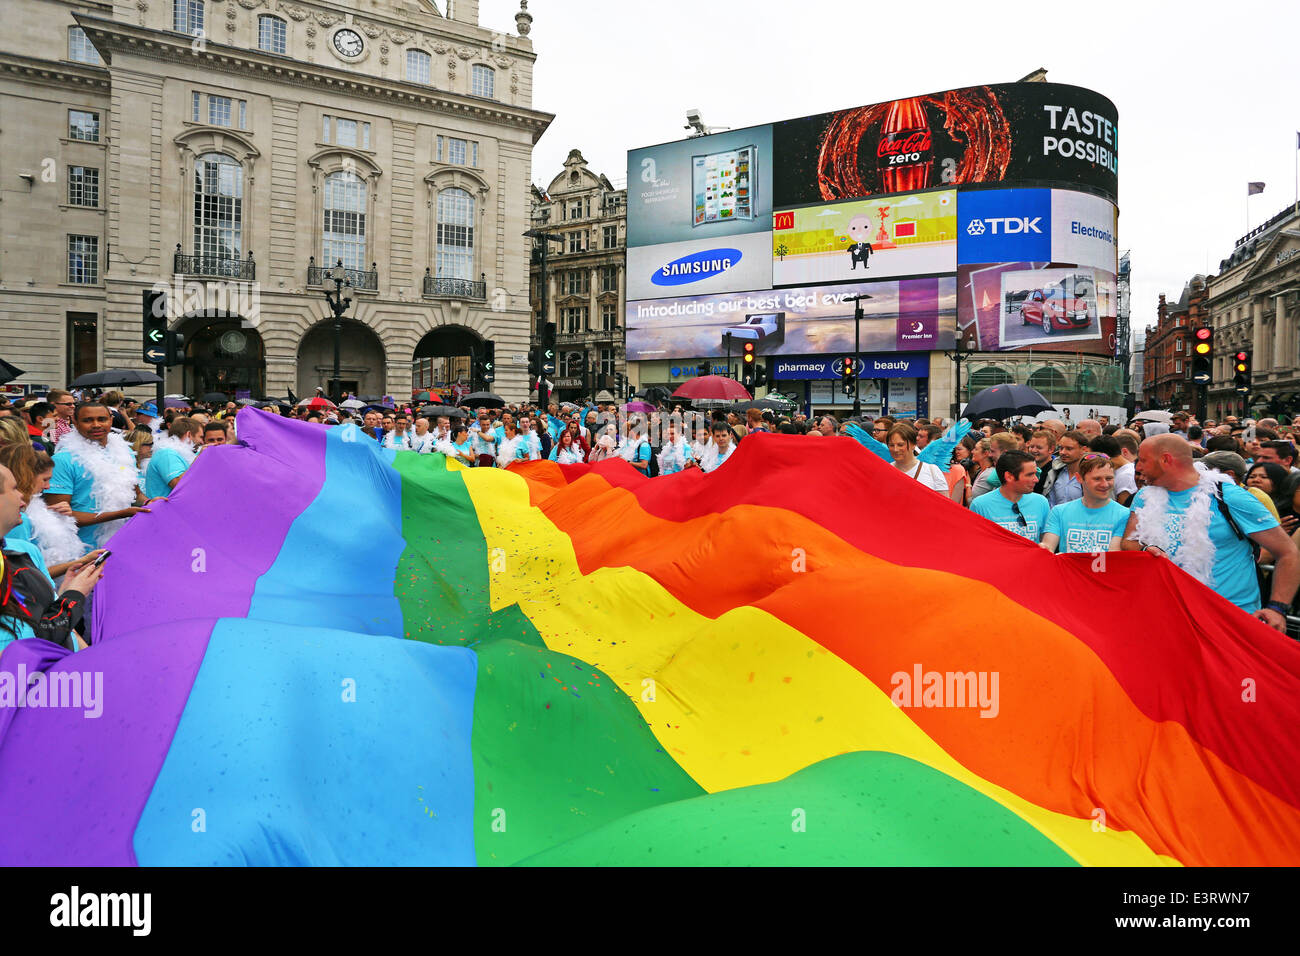 London, UK. 28th June 2014. Giant rainbow flag at Piccadilly Circus at the Pride London Parade 2014 in London. Rain storms throughout the day didn't dampen the spirits of the 20,000 people in the parade of the crowds in the packed streets watching. It did however bring out plenty of rainbow umbrellas. Credit:  Paul Brown/Alamy Live News Stock Photo